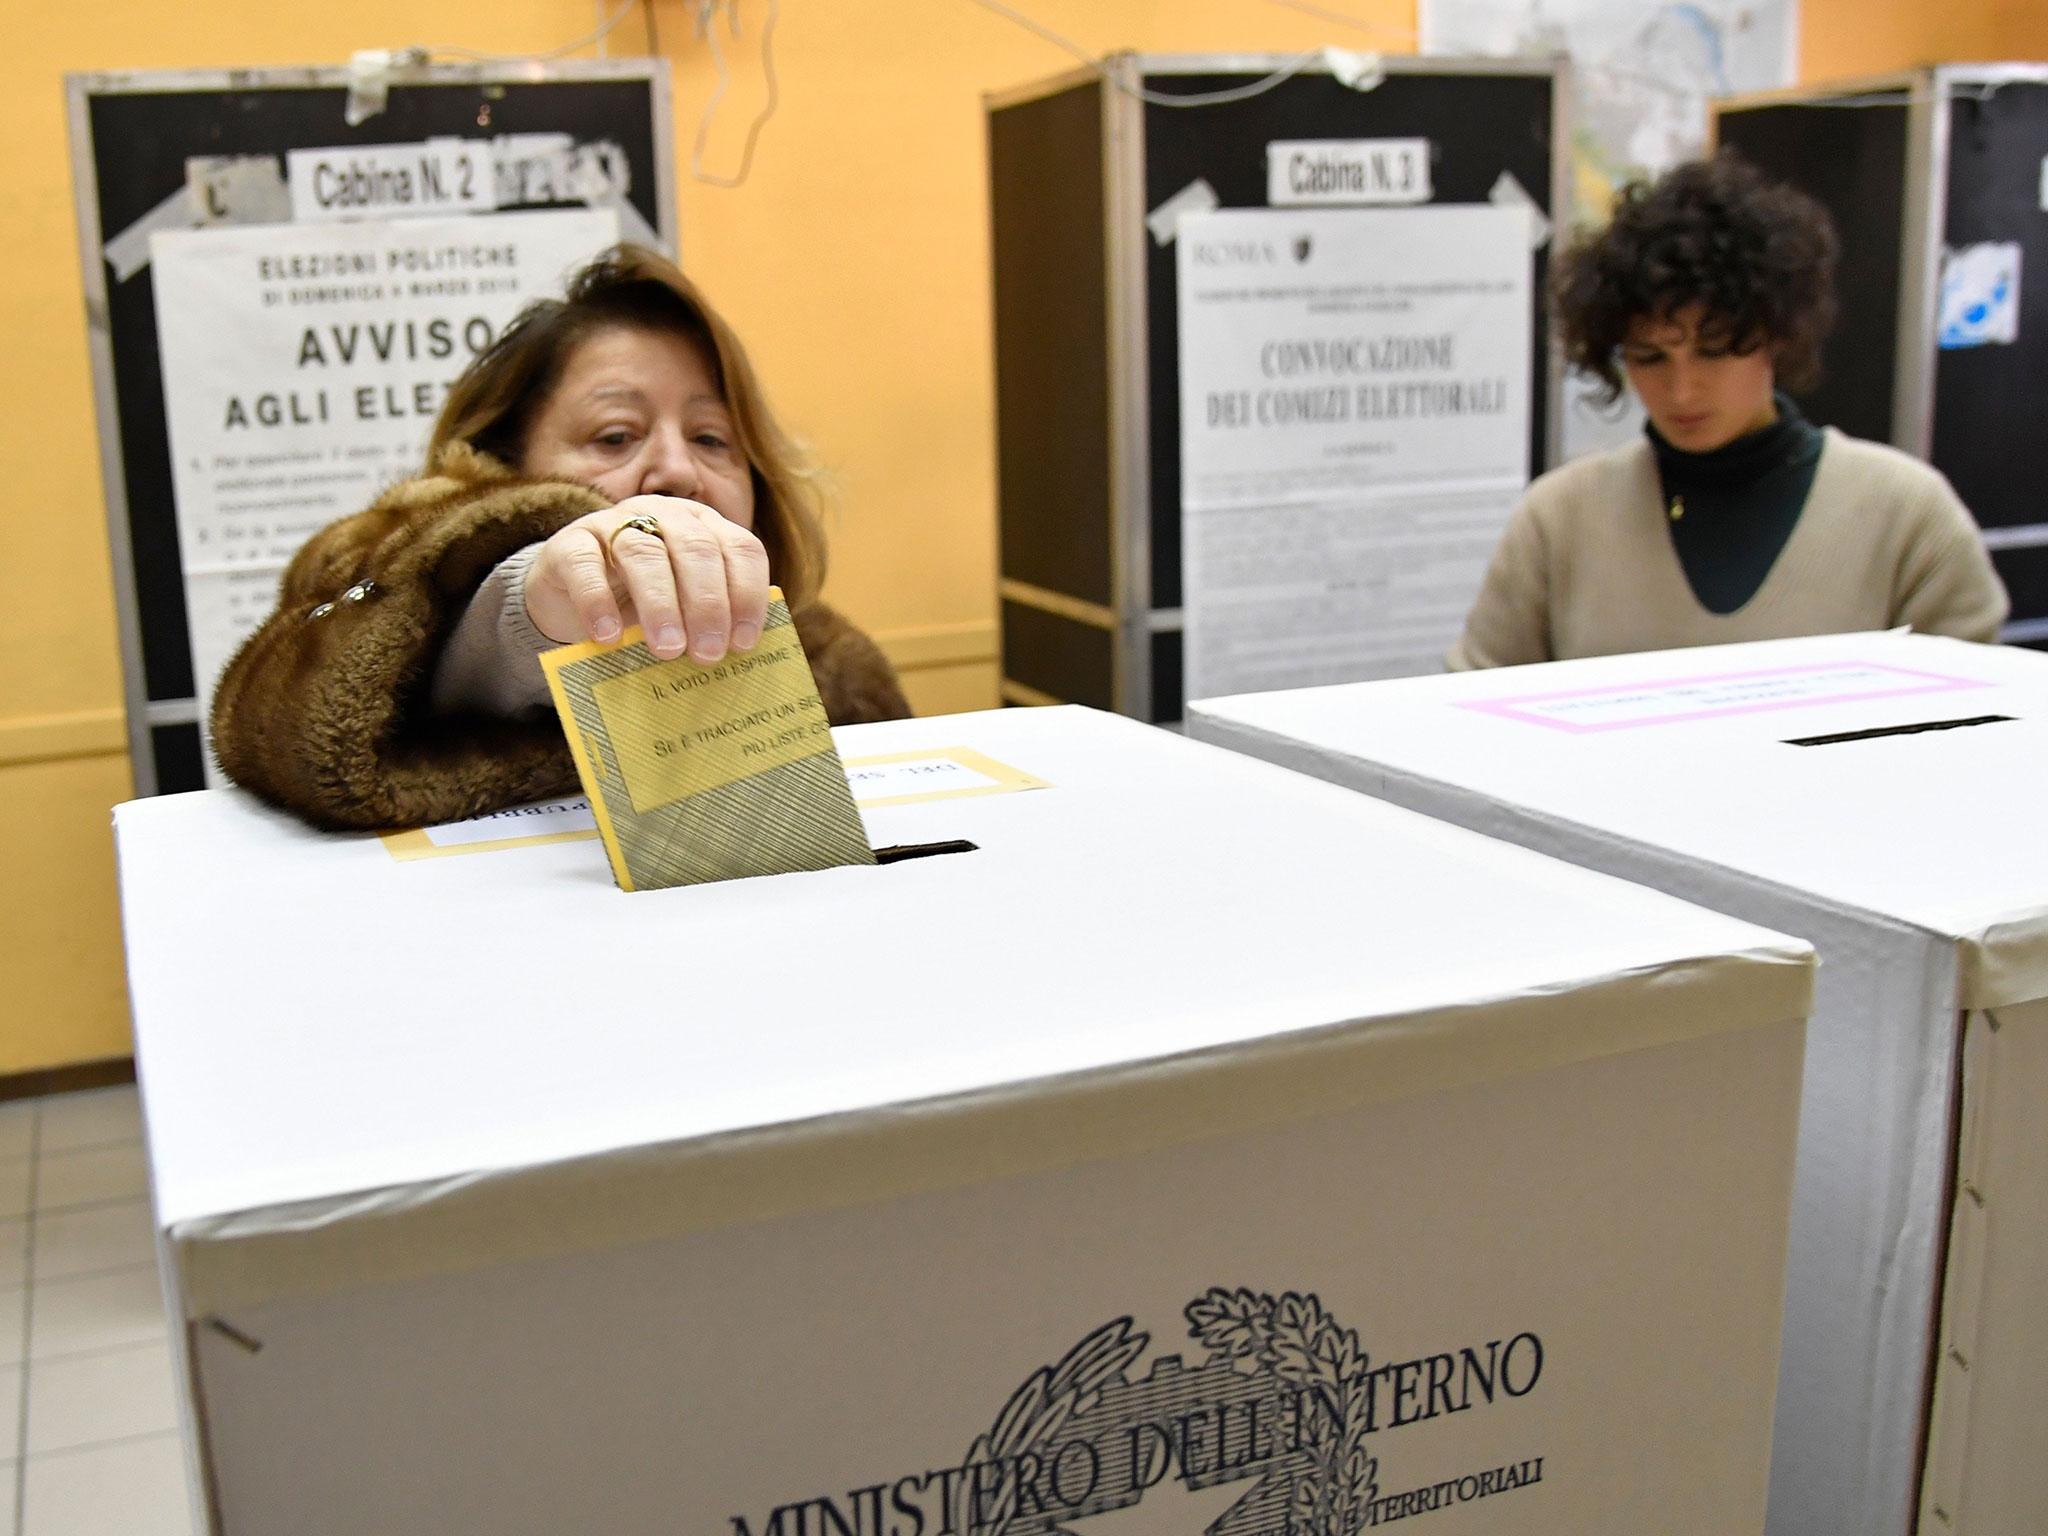 Berlusconi could once again be a crucial player if, as polls predict, his centre-right coalition win the most votes